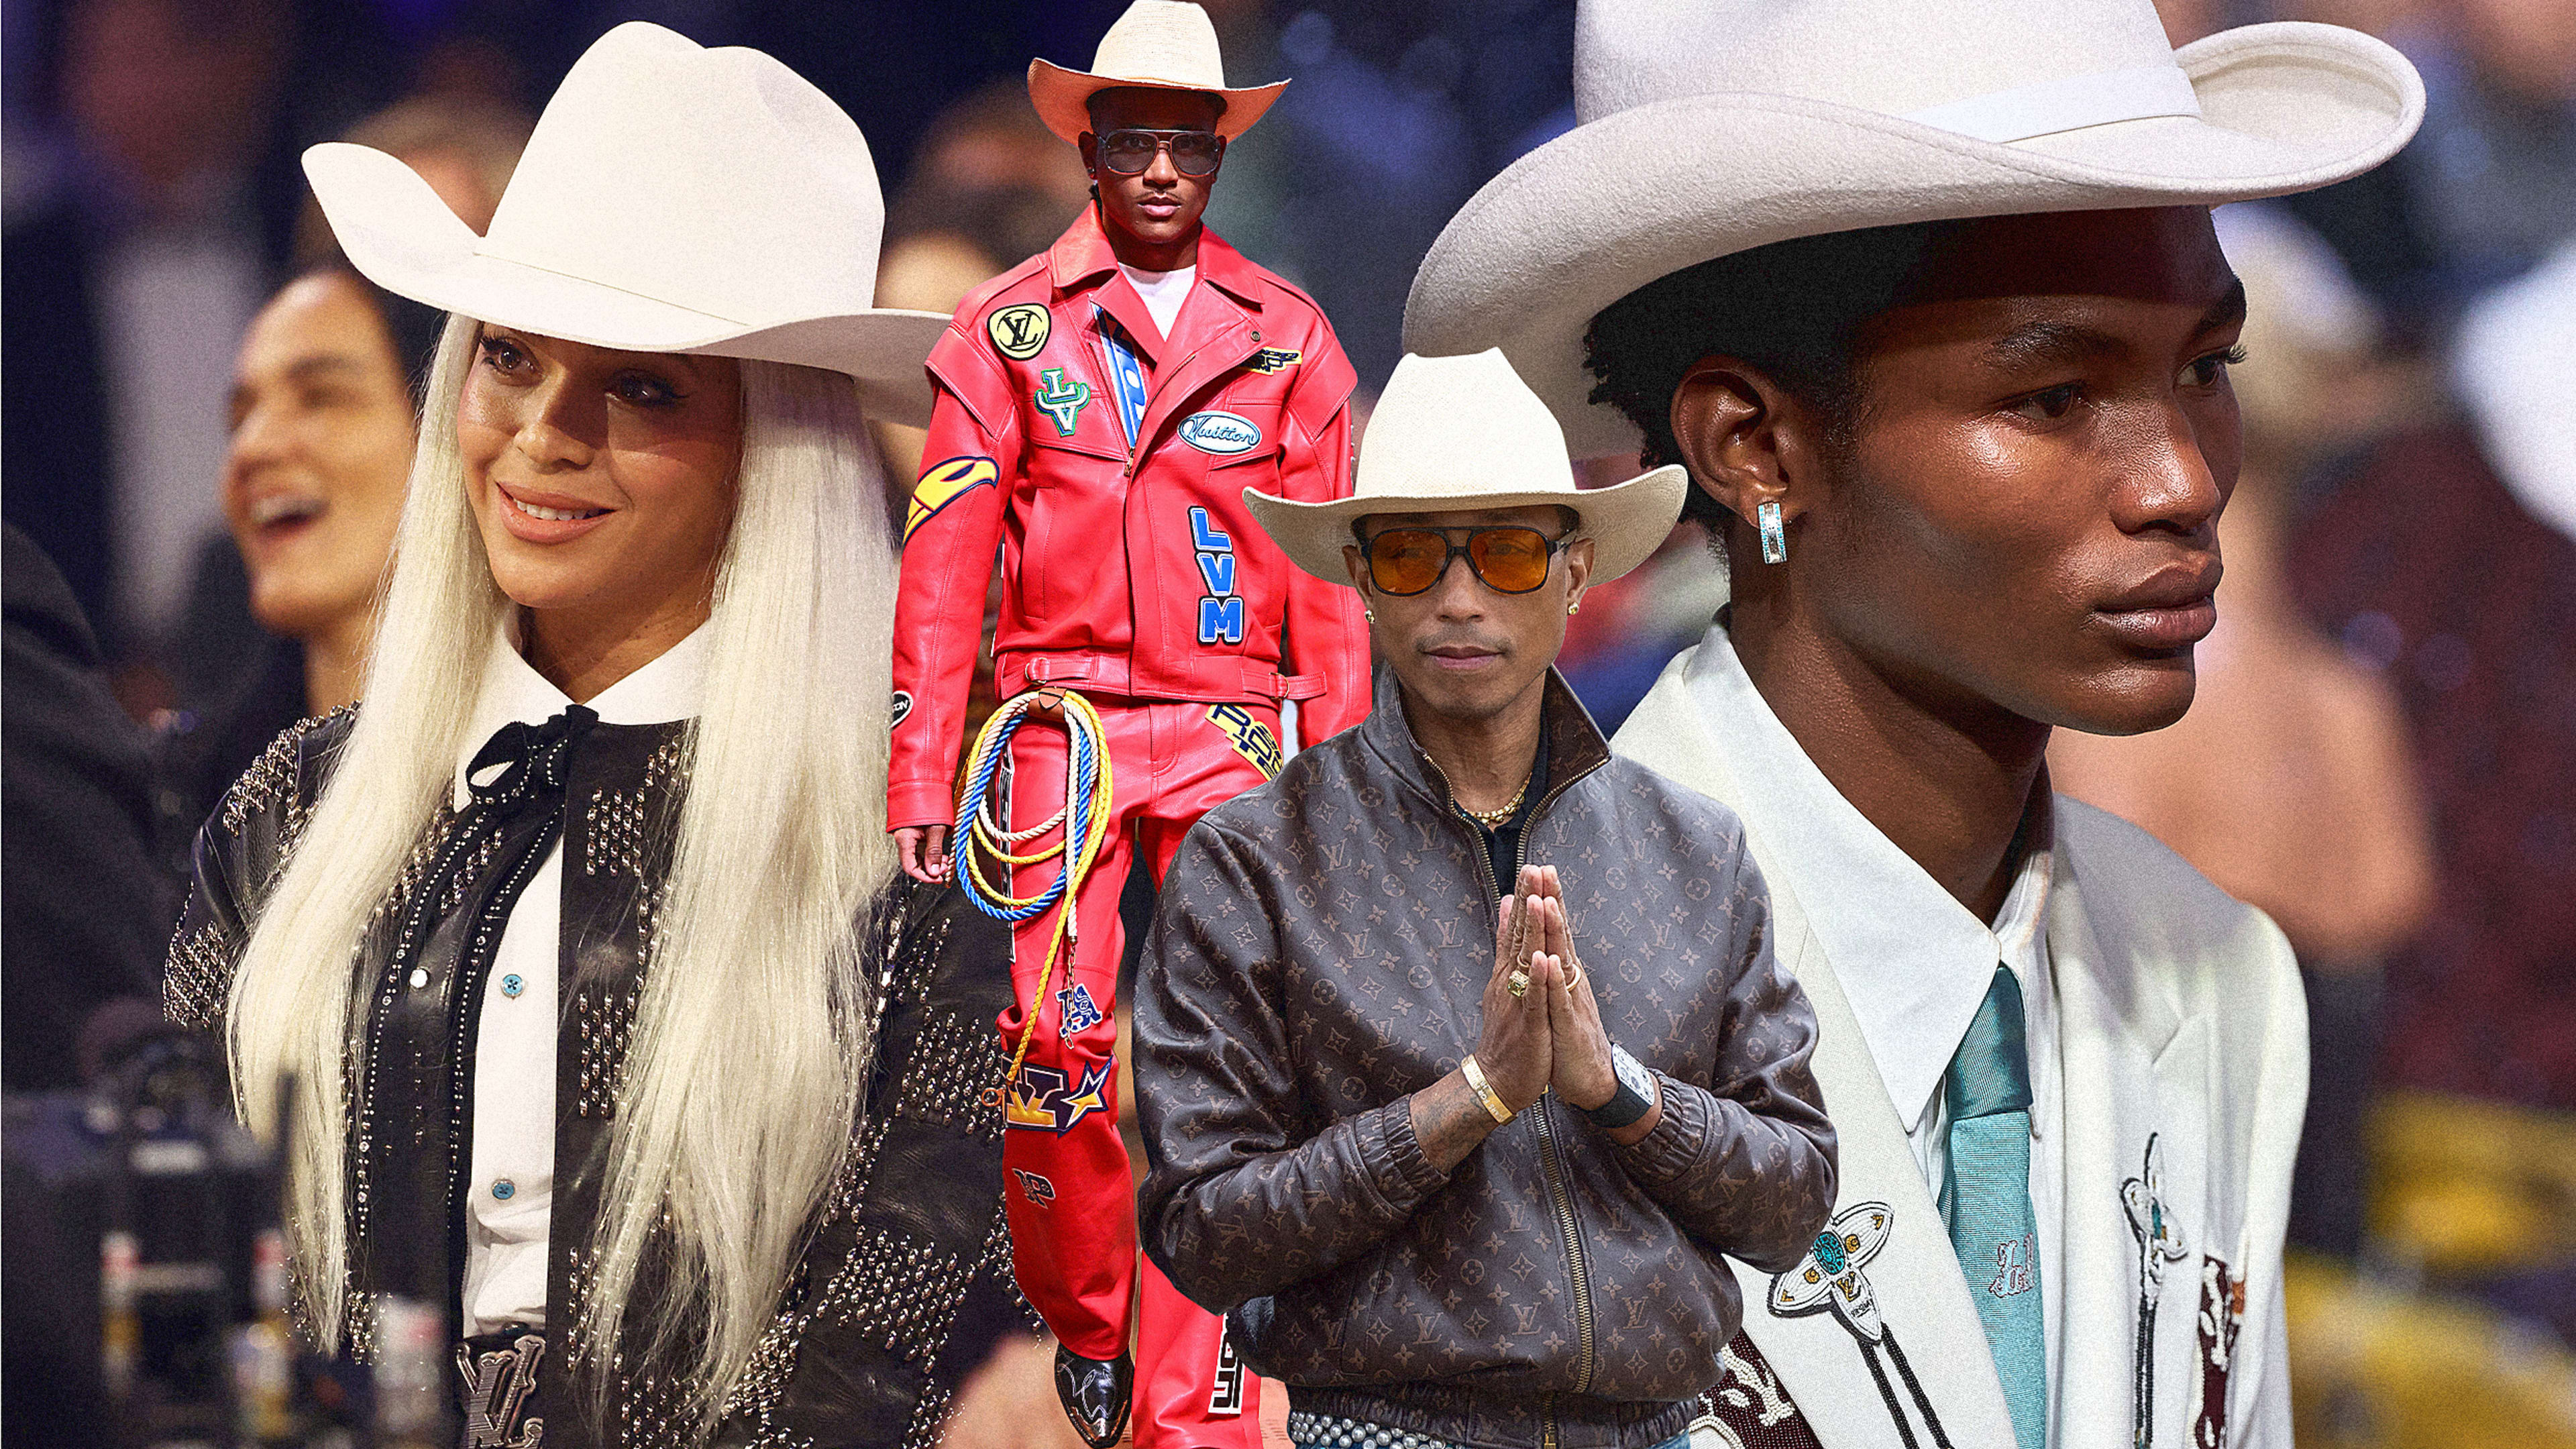 From Louis Vuitton to Gap, the Black cowboy is fashion’s latest muse